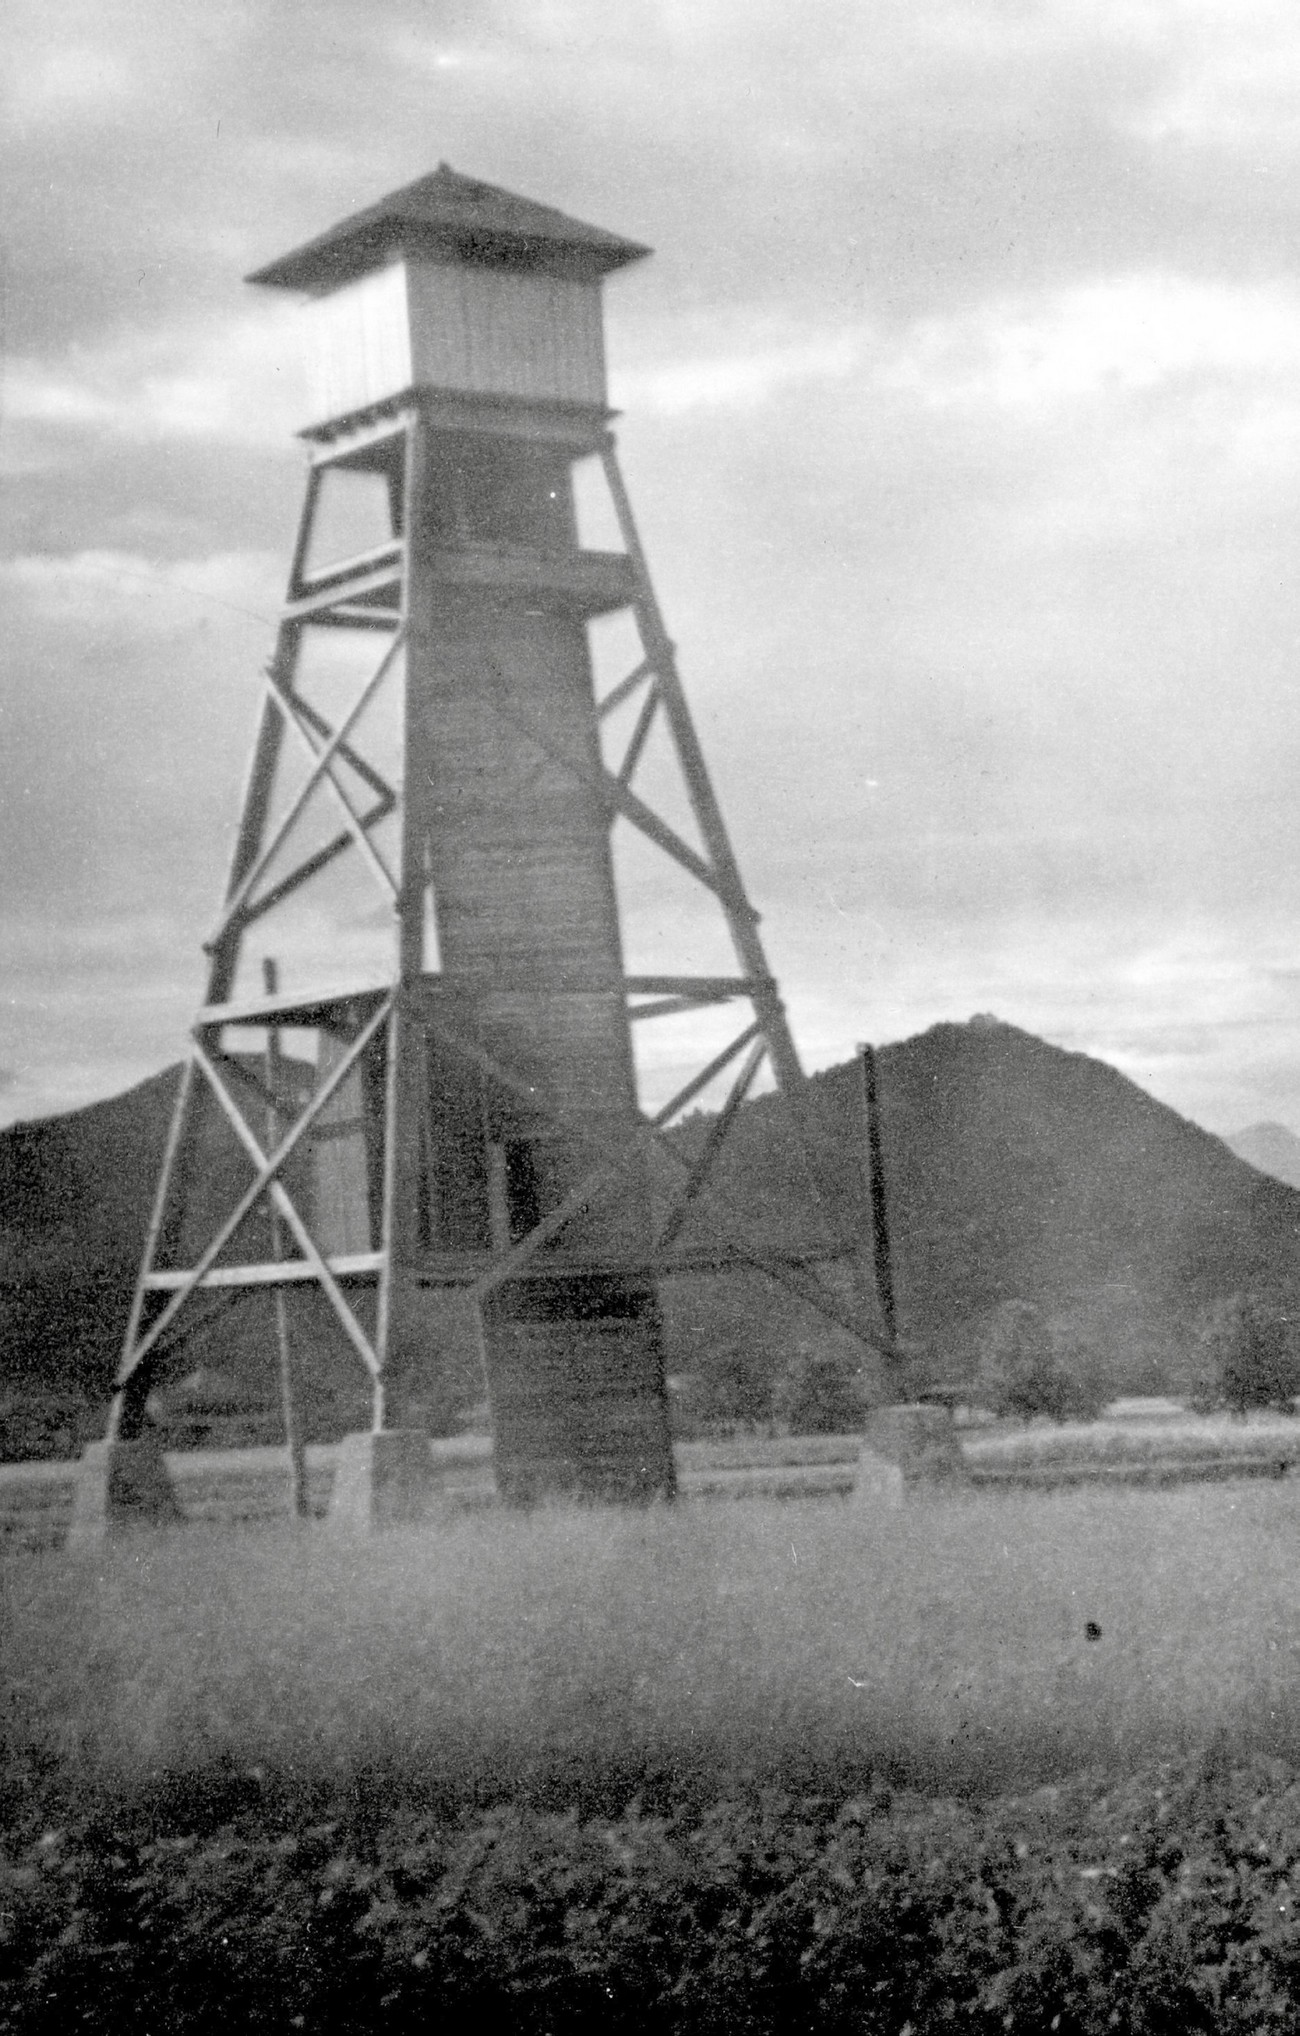 A German watchtower on the border with the Third Reich. MNZS.